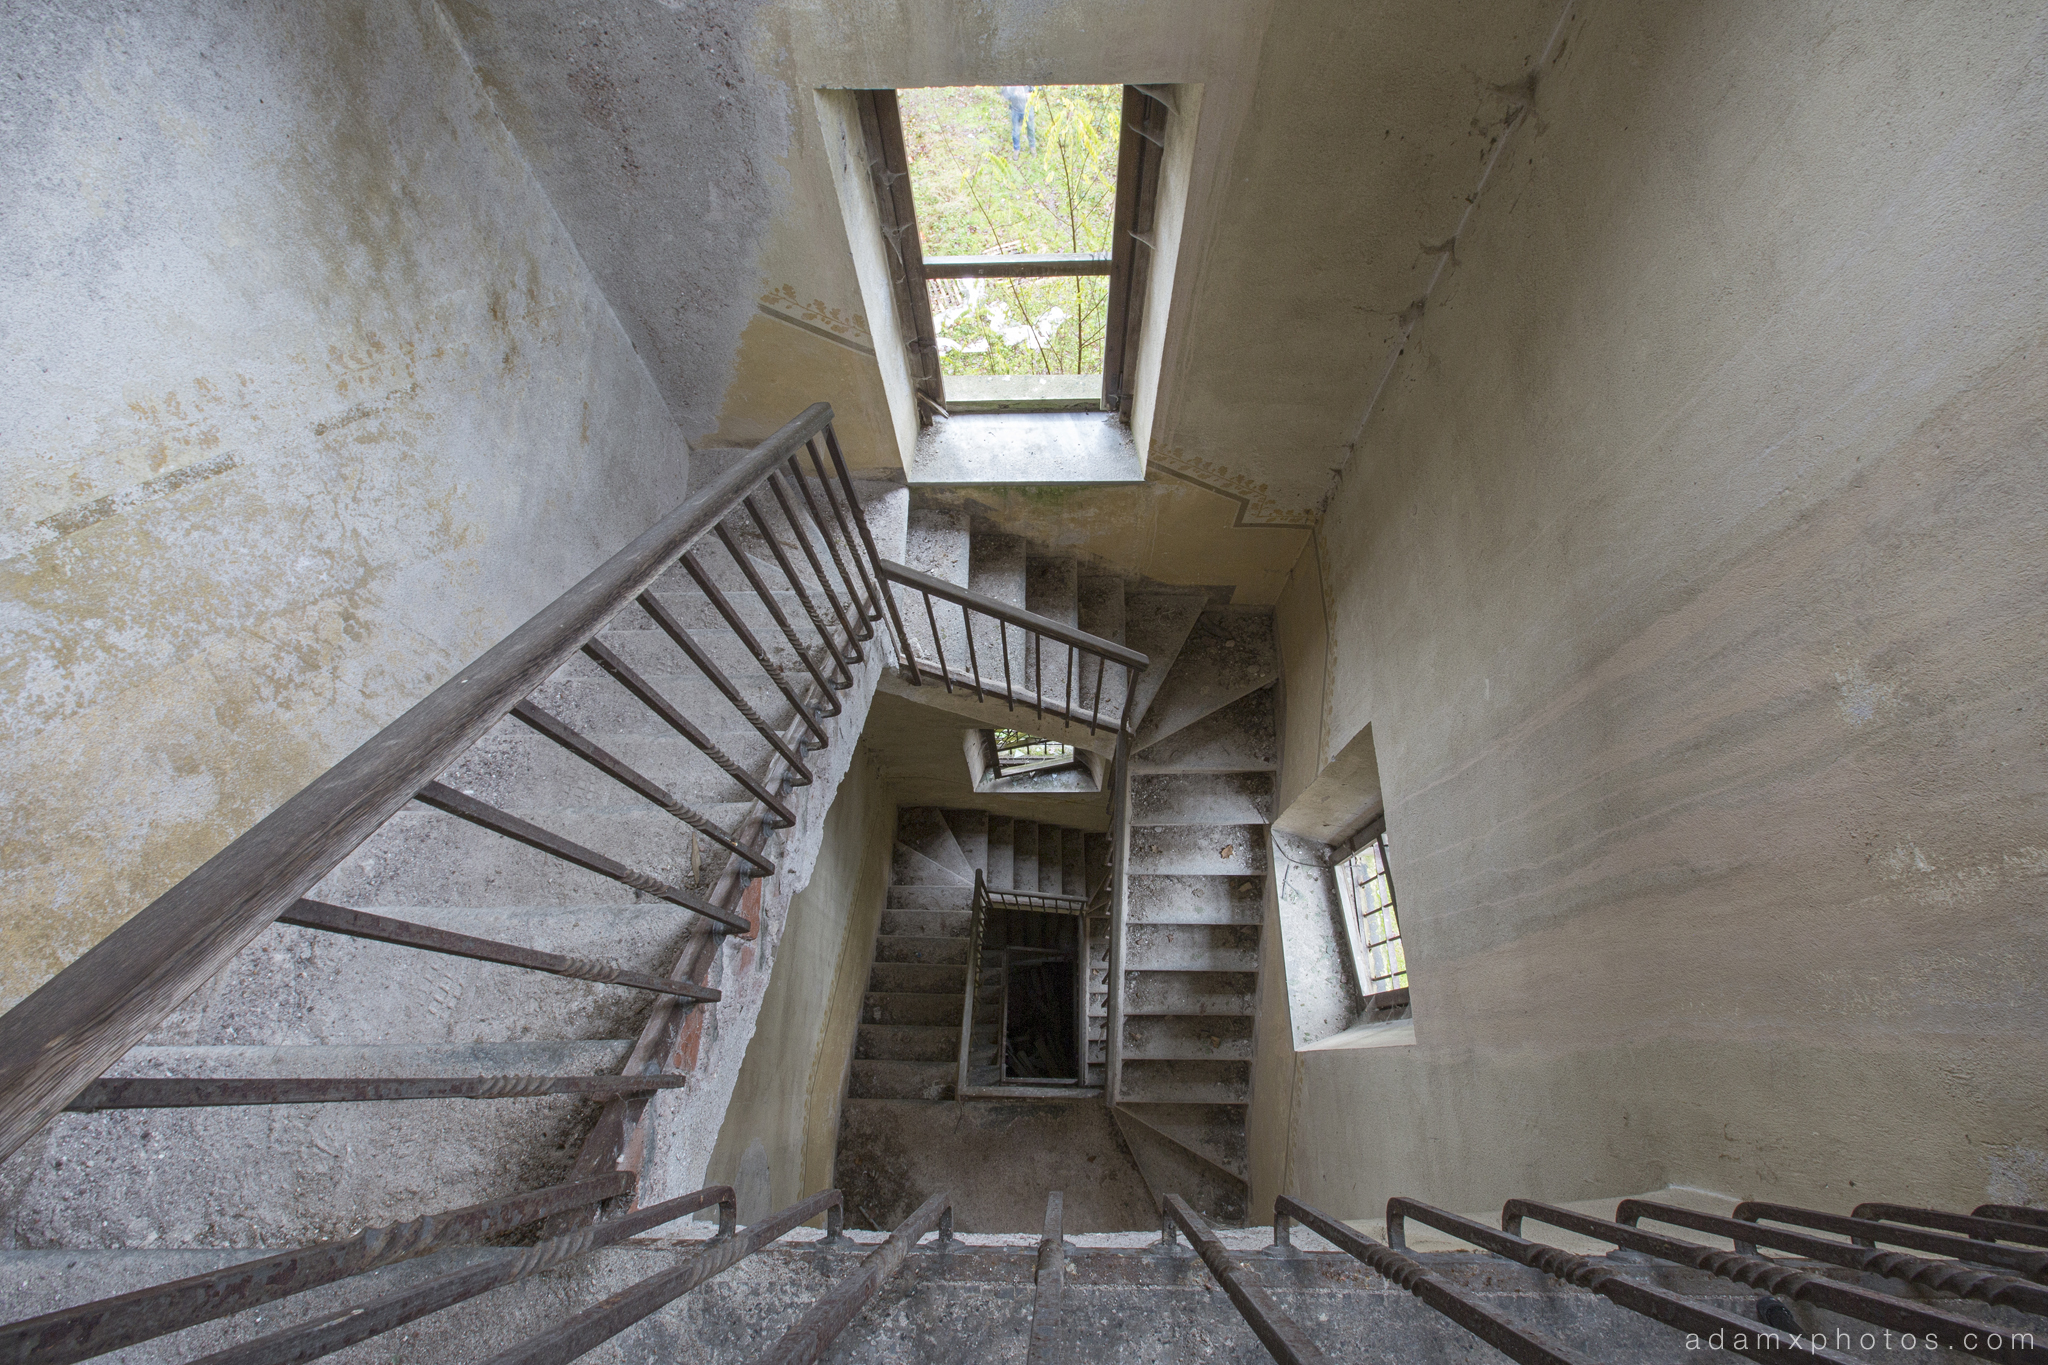 Castello di R Italy castle Urbex Adam X Urban Exploration spiral staircase looking down stairs photo photos report decay detail UE abandoned derelict unused empty disused decay decayed decaying grimy grime